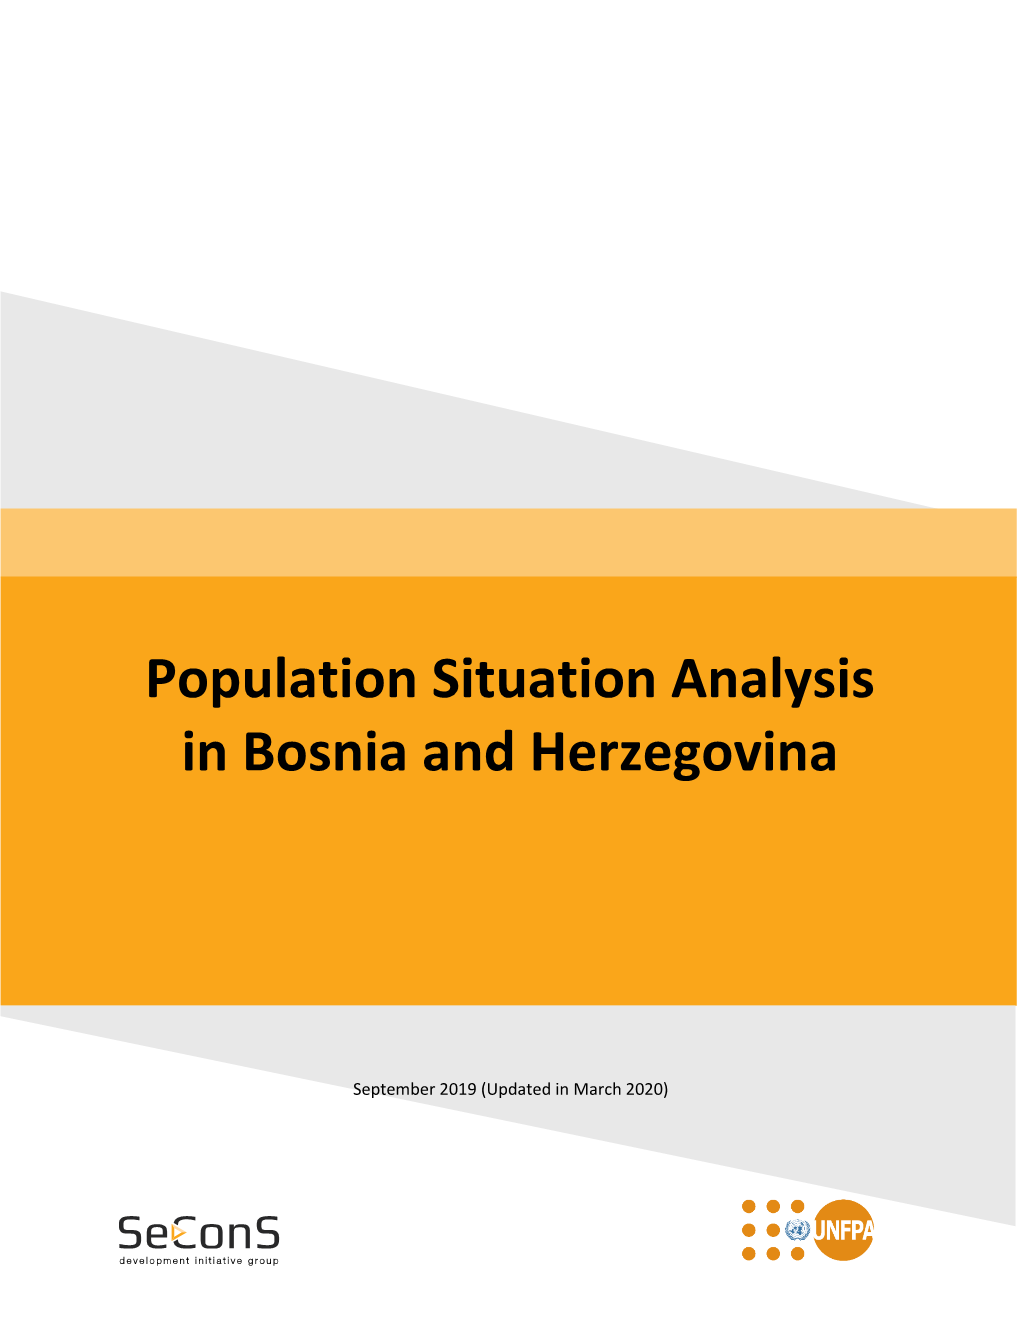 Population Situation Analysis in Bosnia and Herzegovina